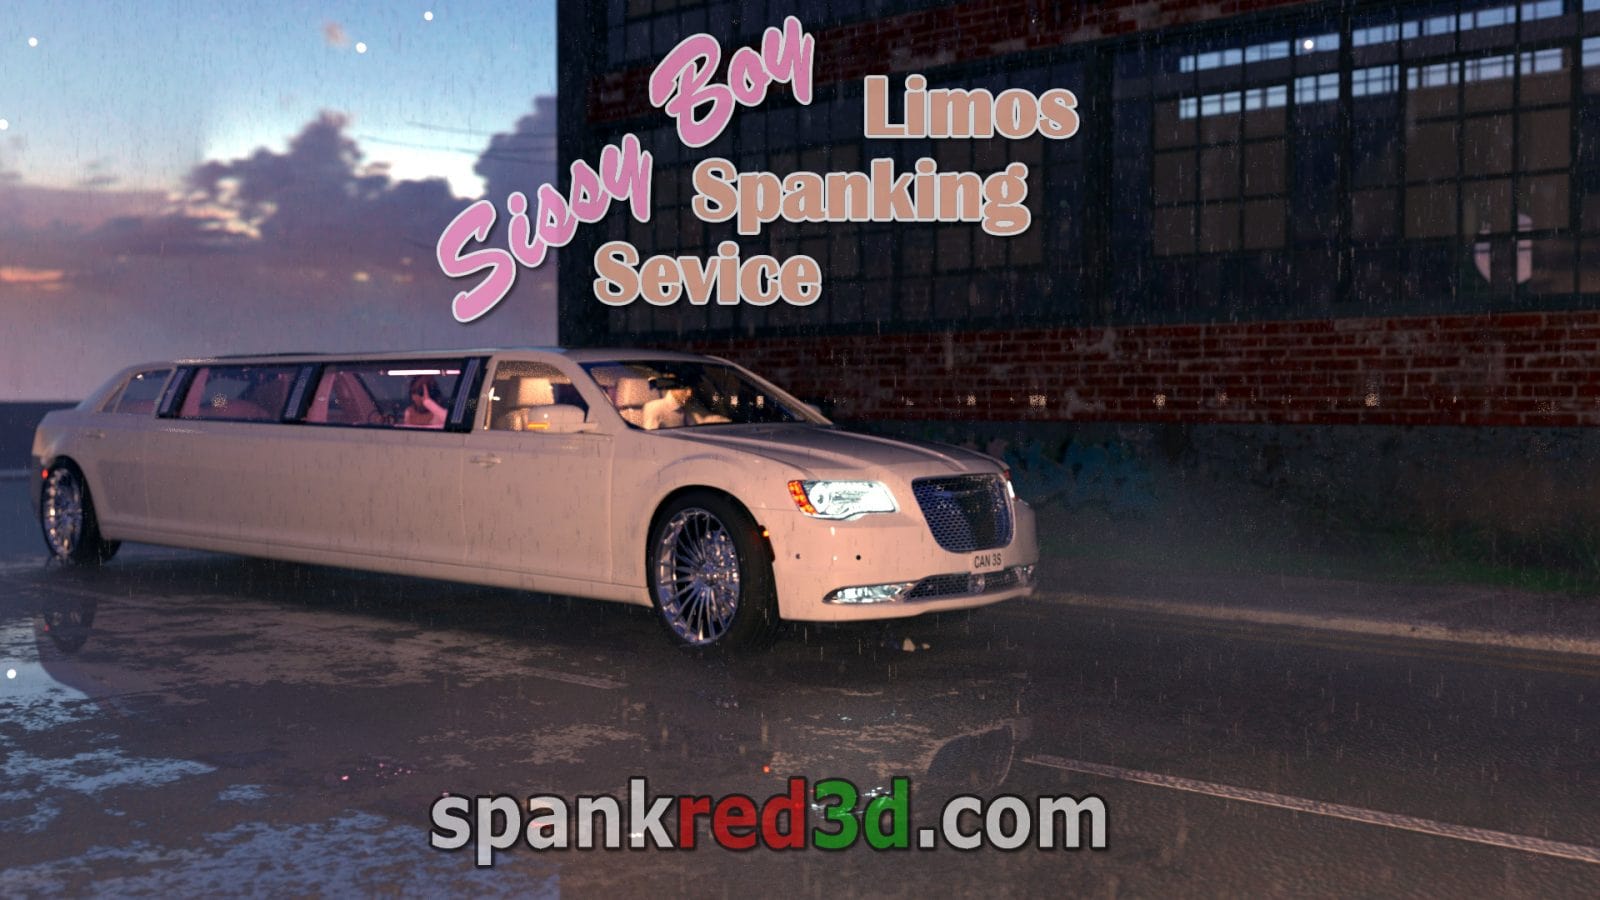 Sissy Limo Spanking Services with blow jobs and Red Bottoms